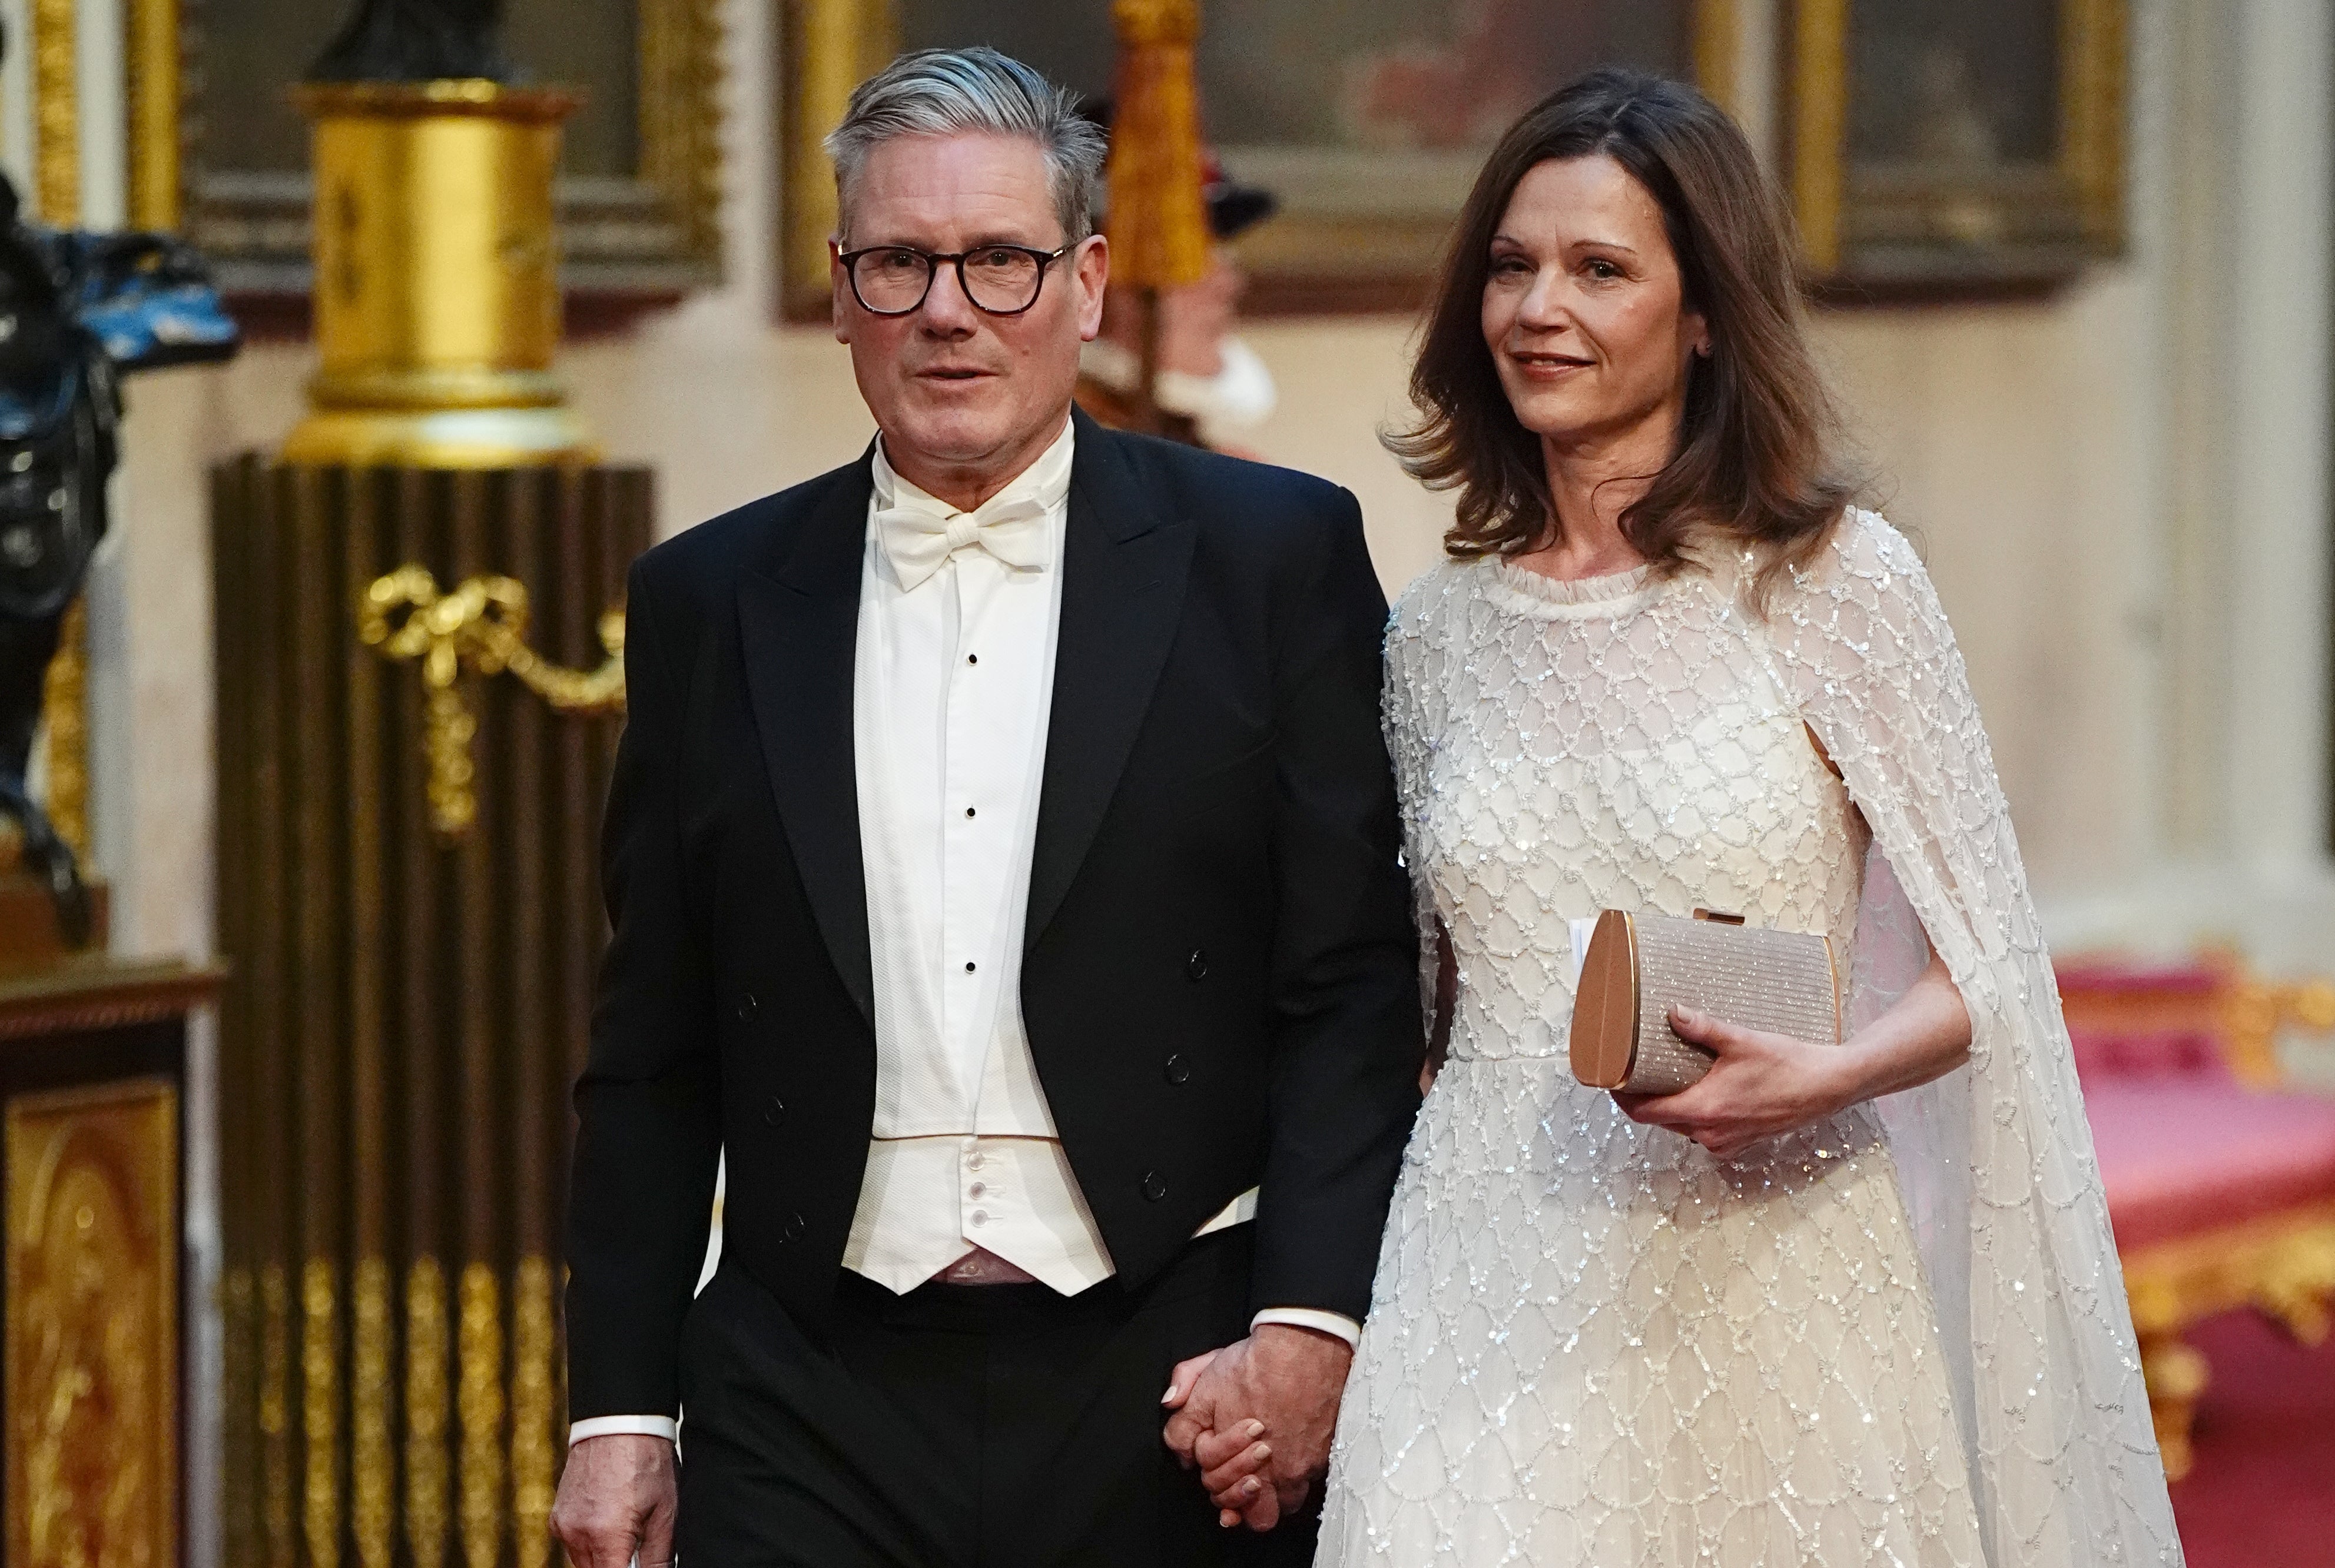 Labour leader Sir Keir Starmer with his wife, Victoria, make their way along the East Gallery to attend the state banquet for Emperor Naruhito (Aaron Chown/PA)